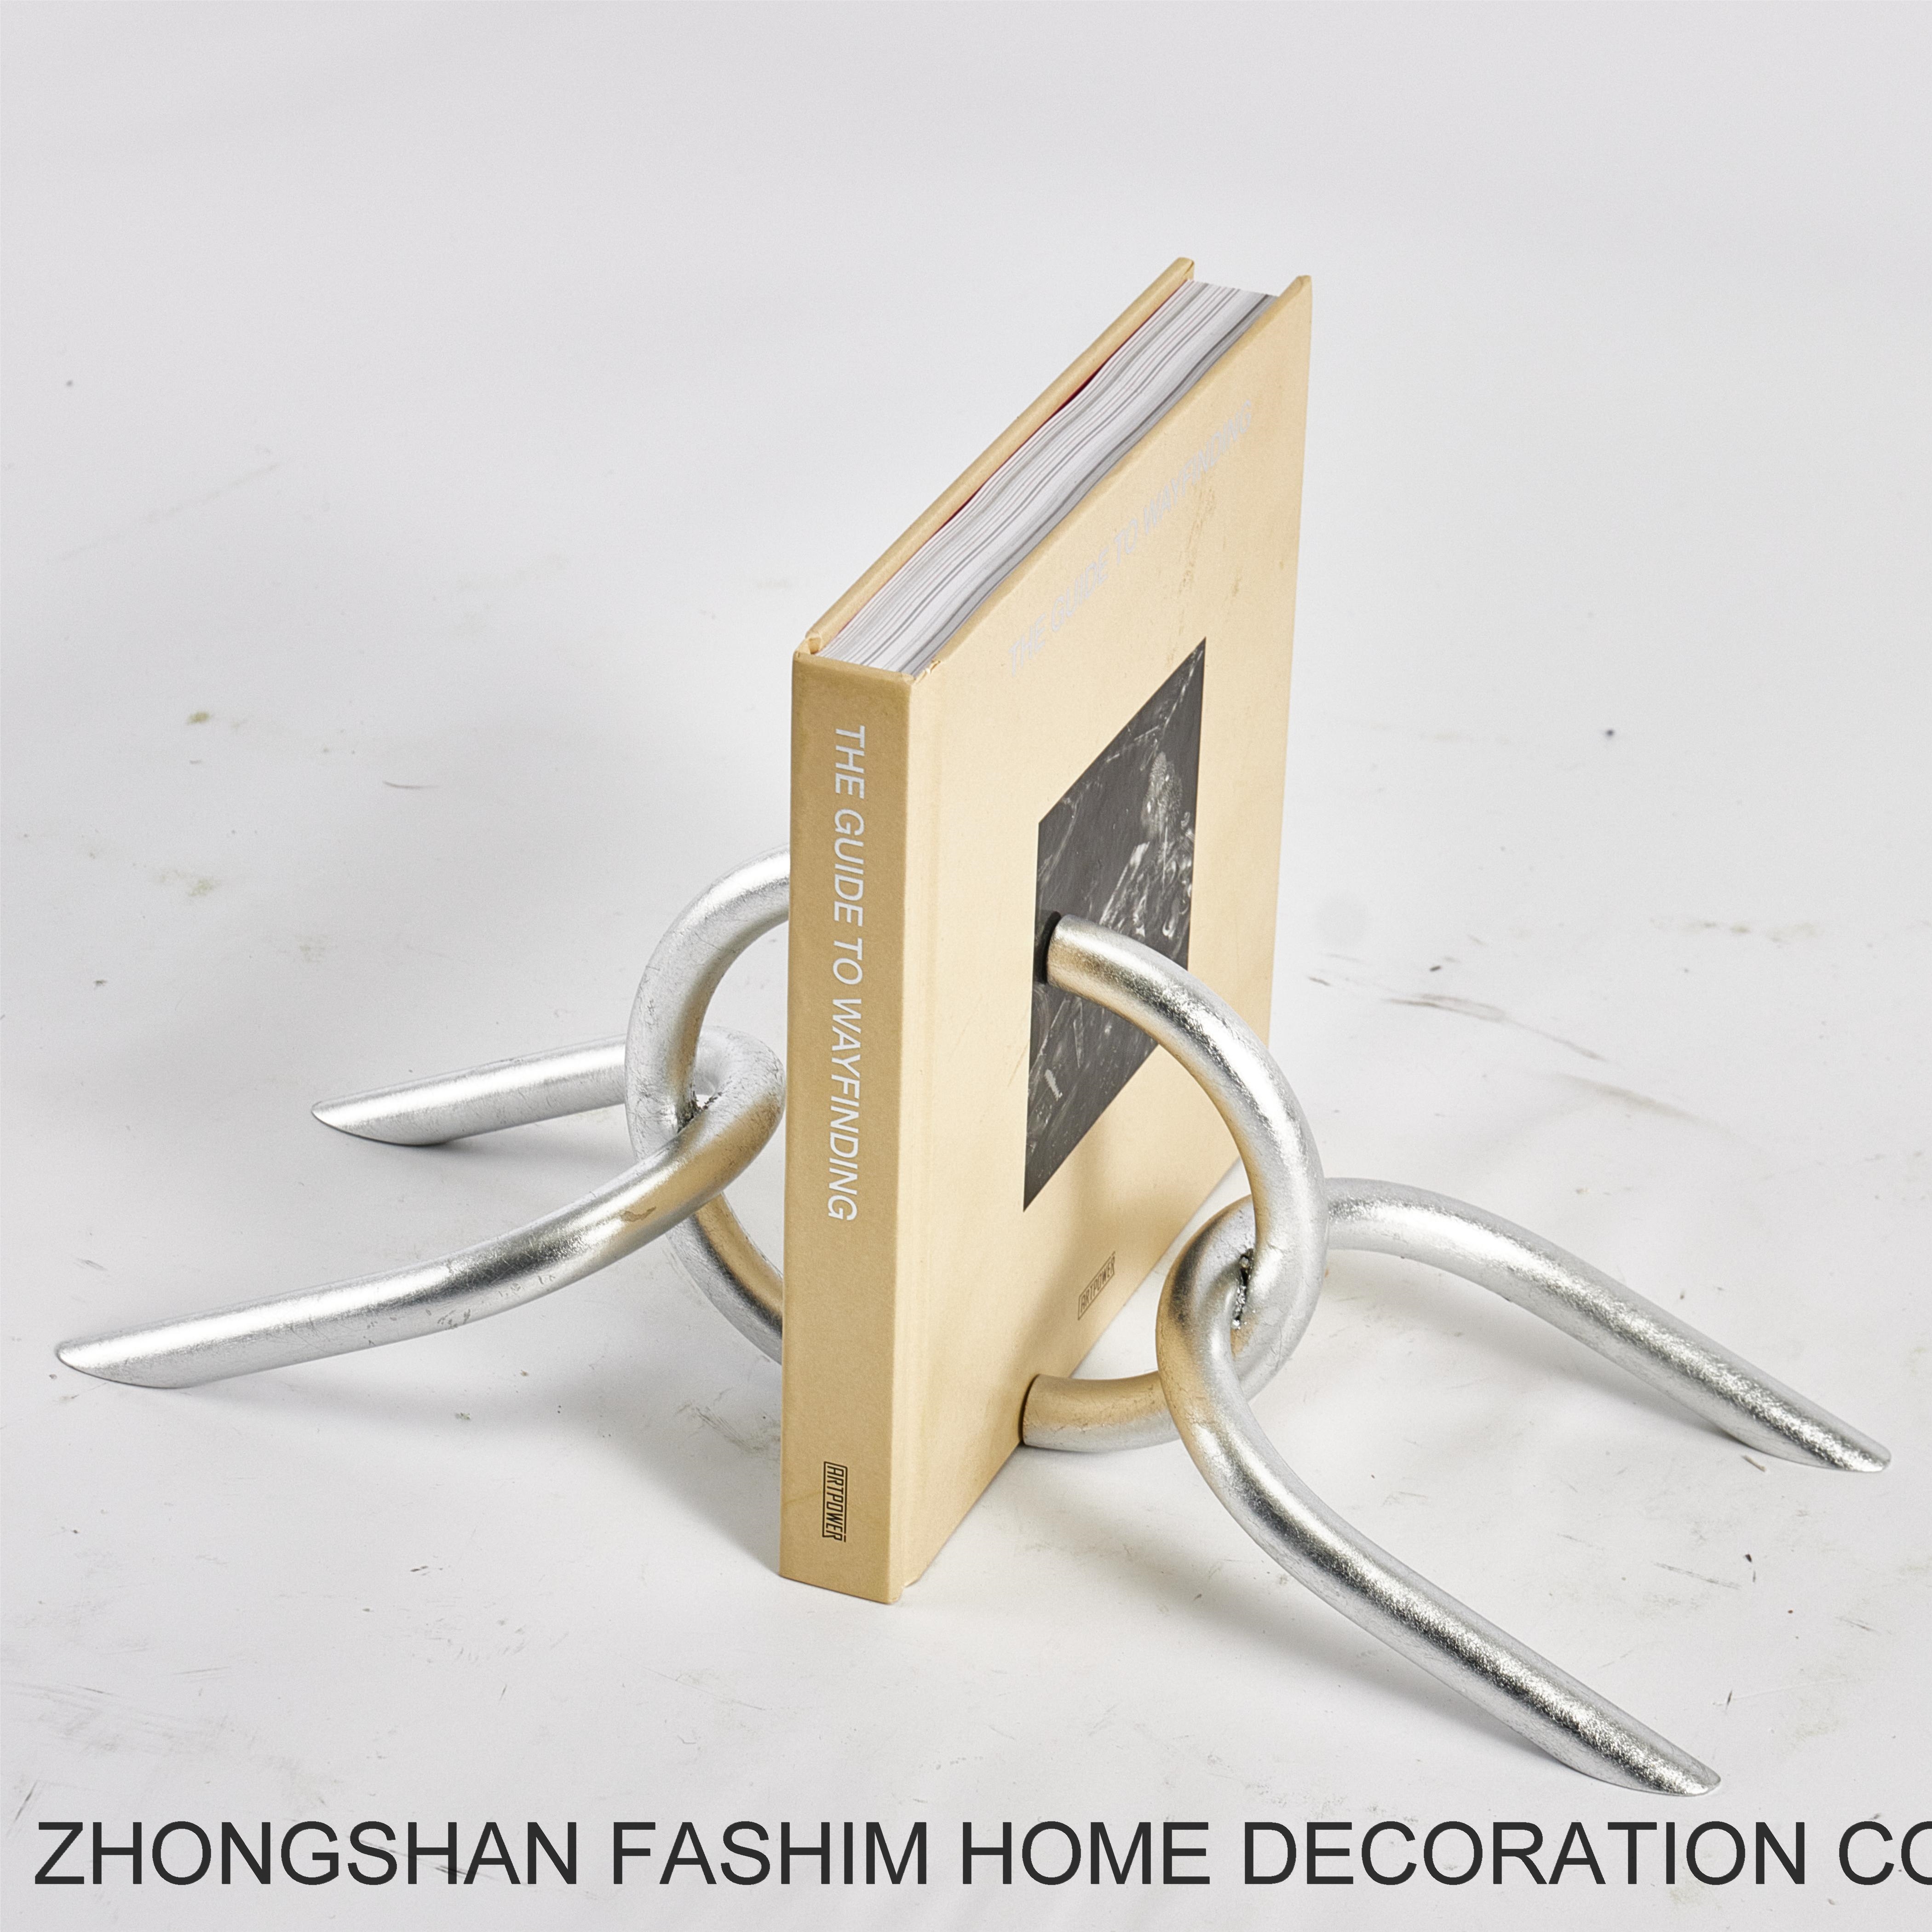 Fashimdecor modern s s steel home decoration sculpture ornaments bookend